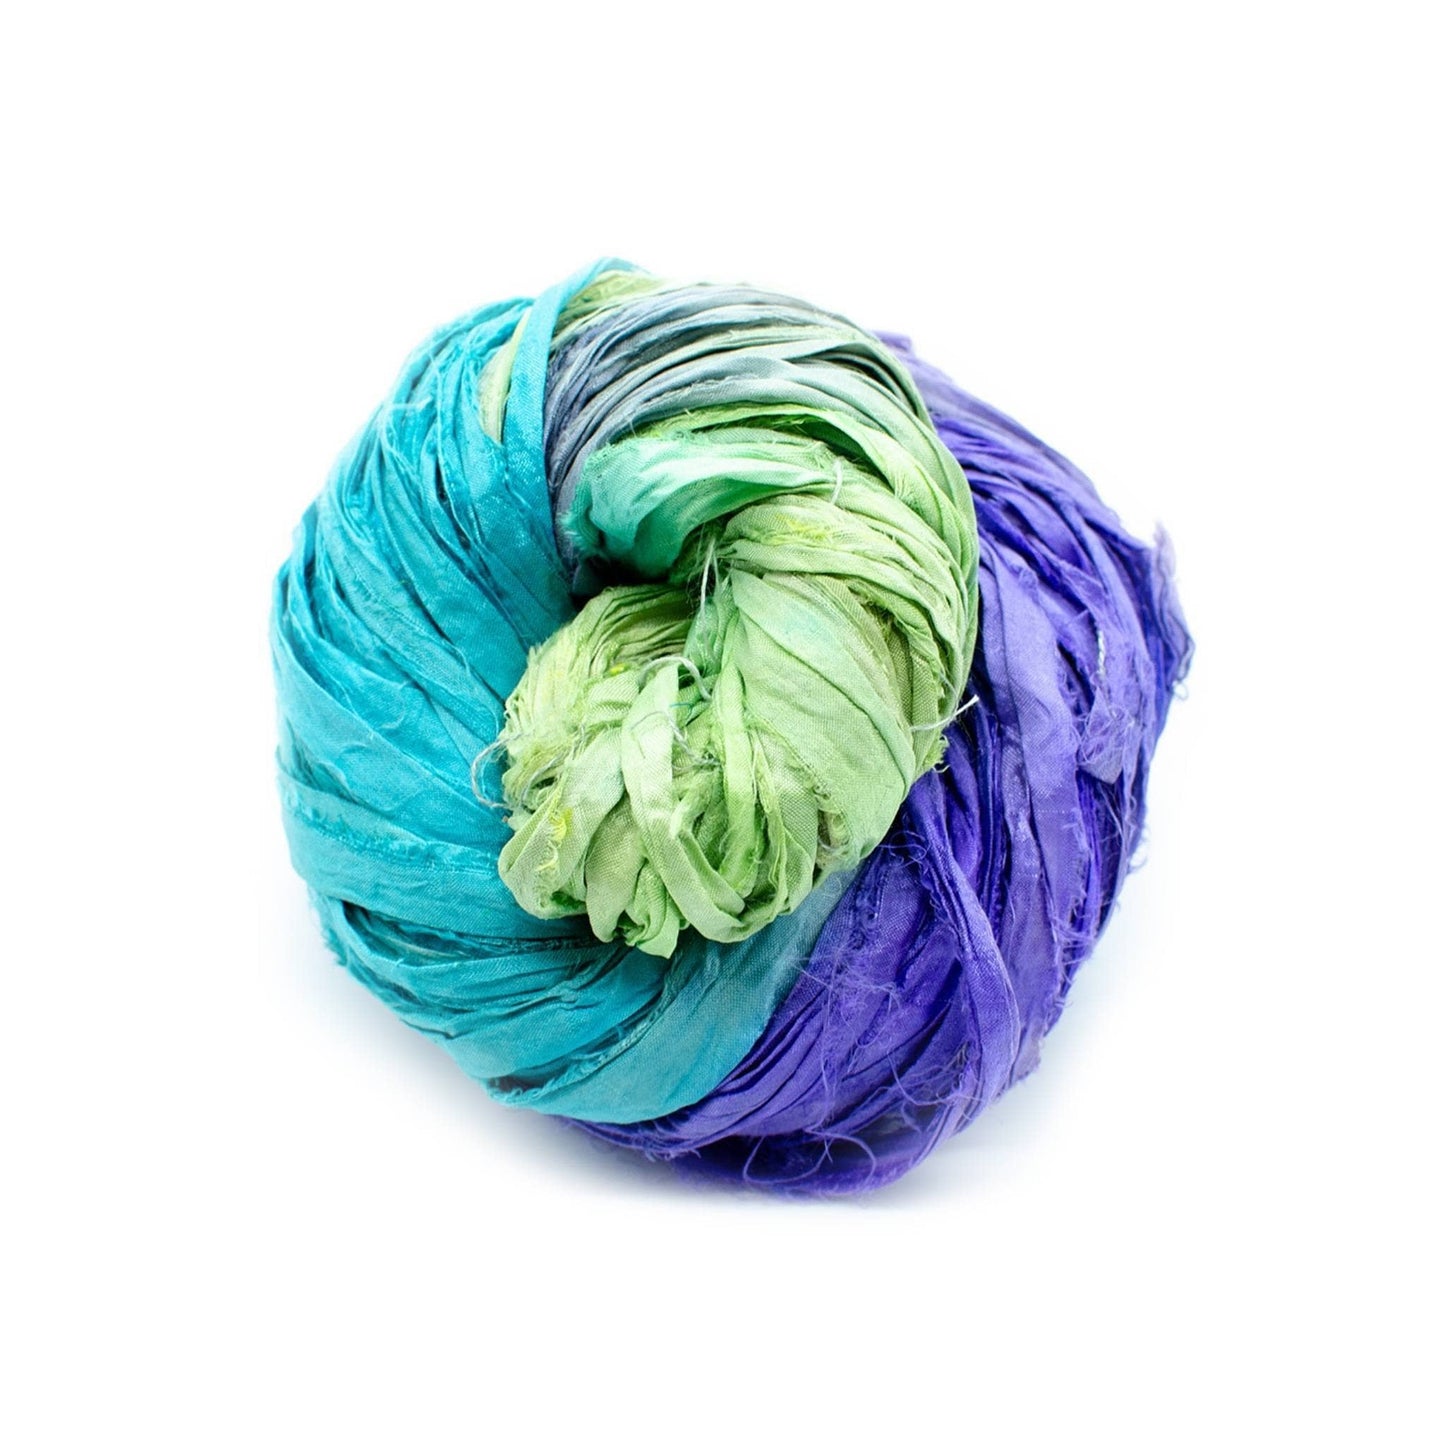 A variegated skein of blue, purple, and green sari silk ribbon on a white background